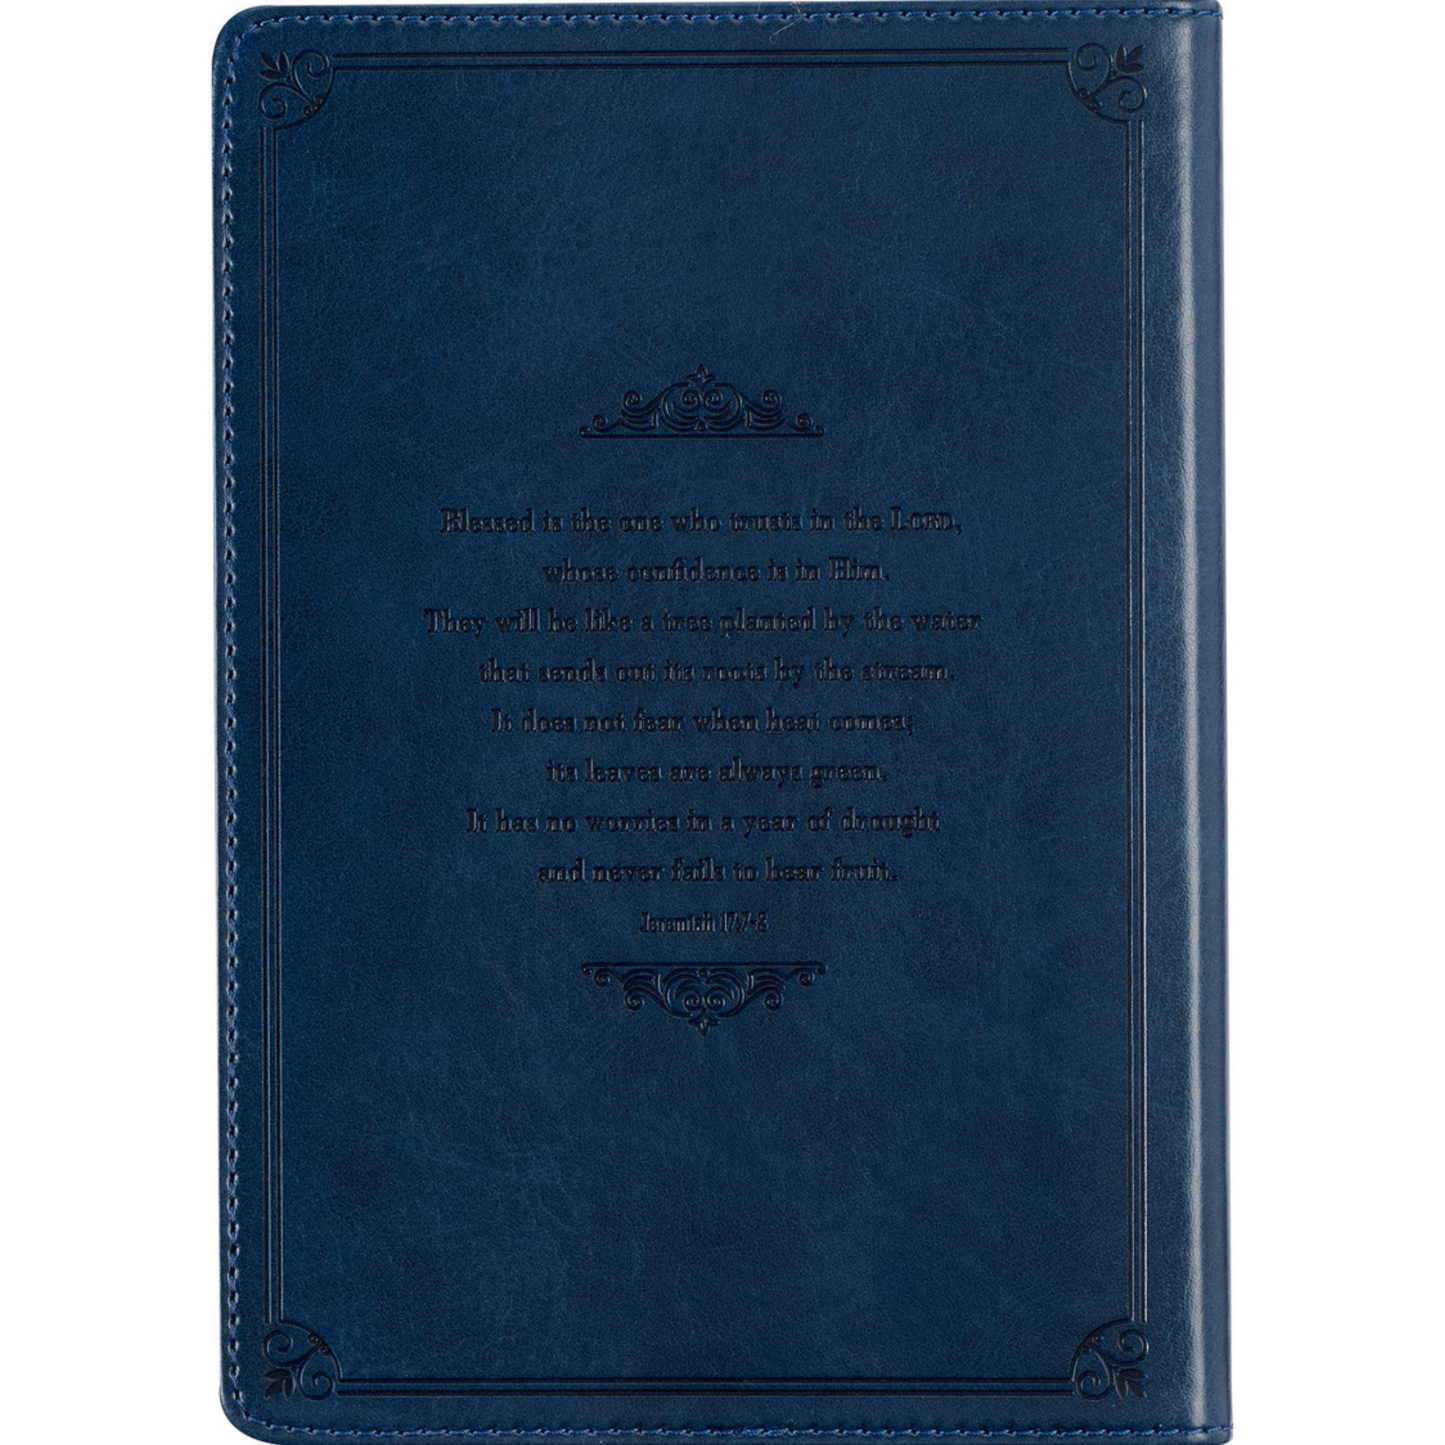 Leather Journal - Blessed is the One, Jeremiah 17:7 (JL670)